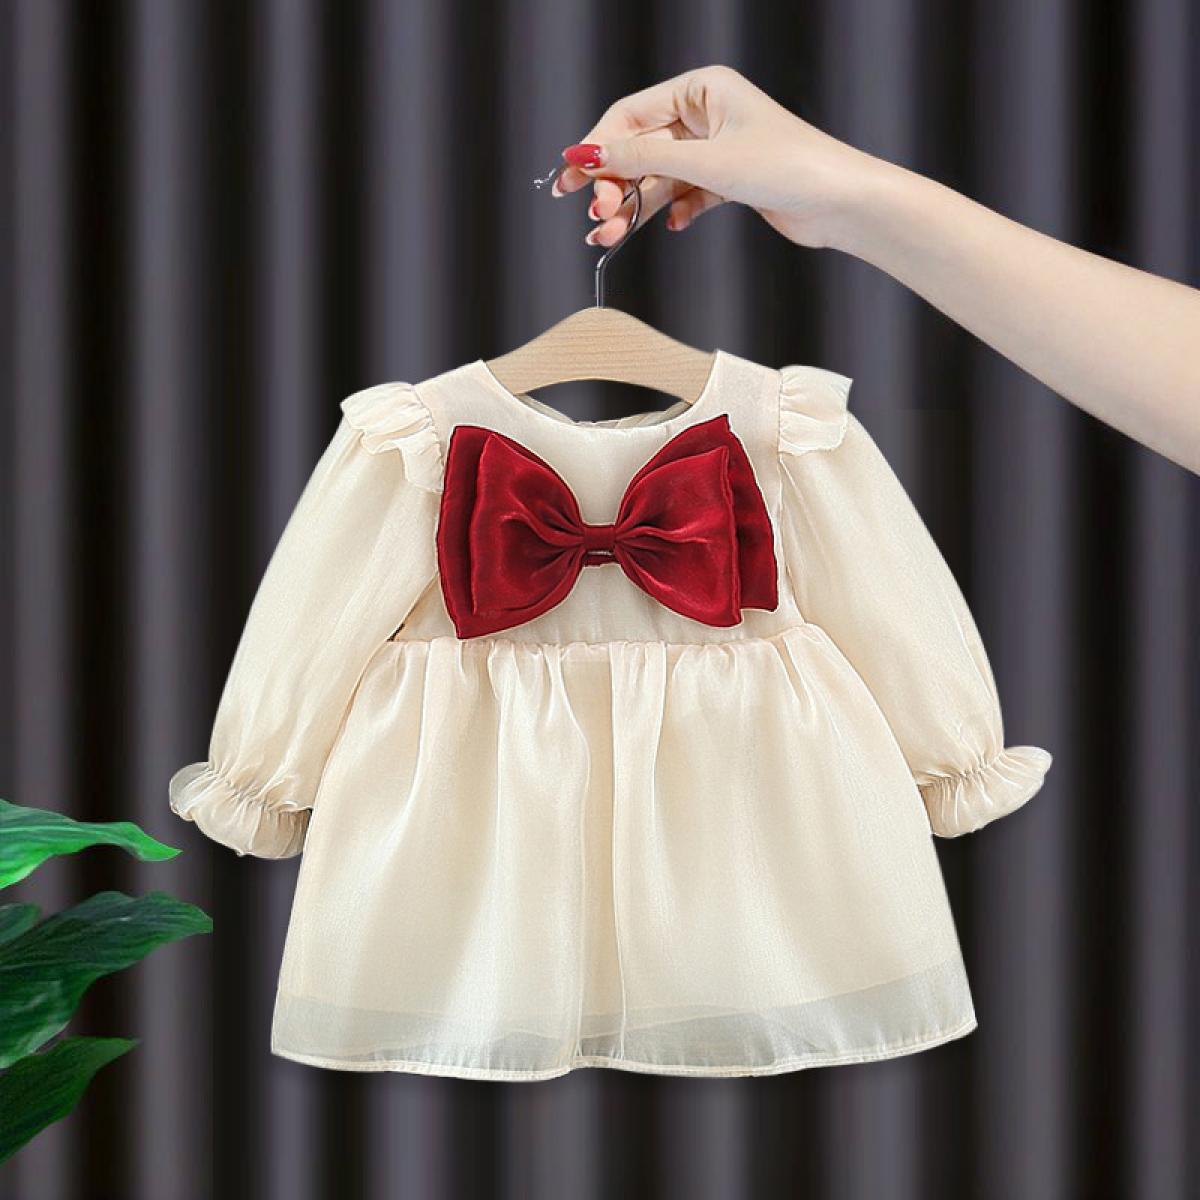 Adorable Baby Girl Dress Designs for Every Occasion